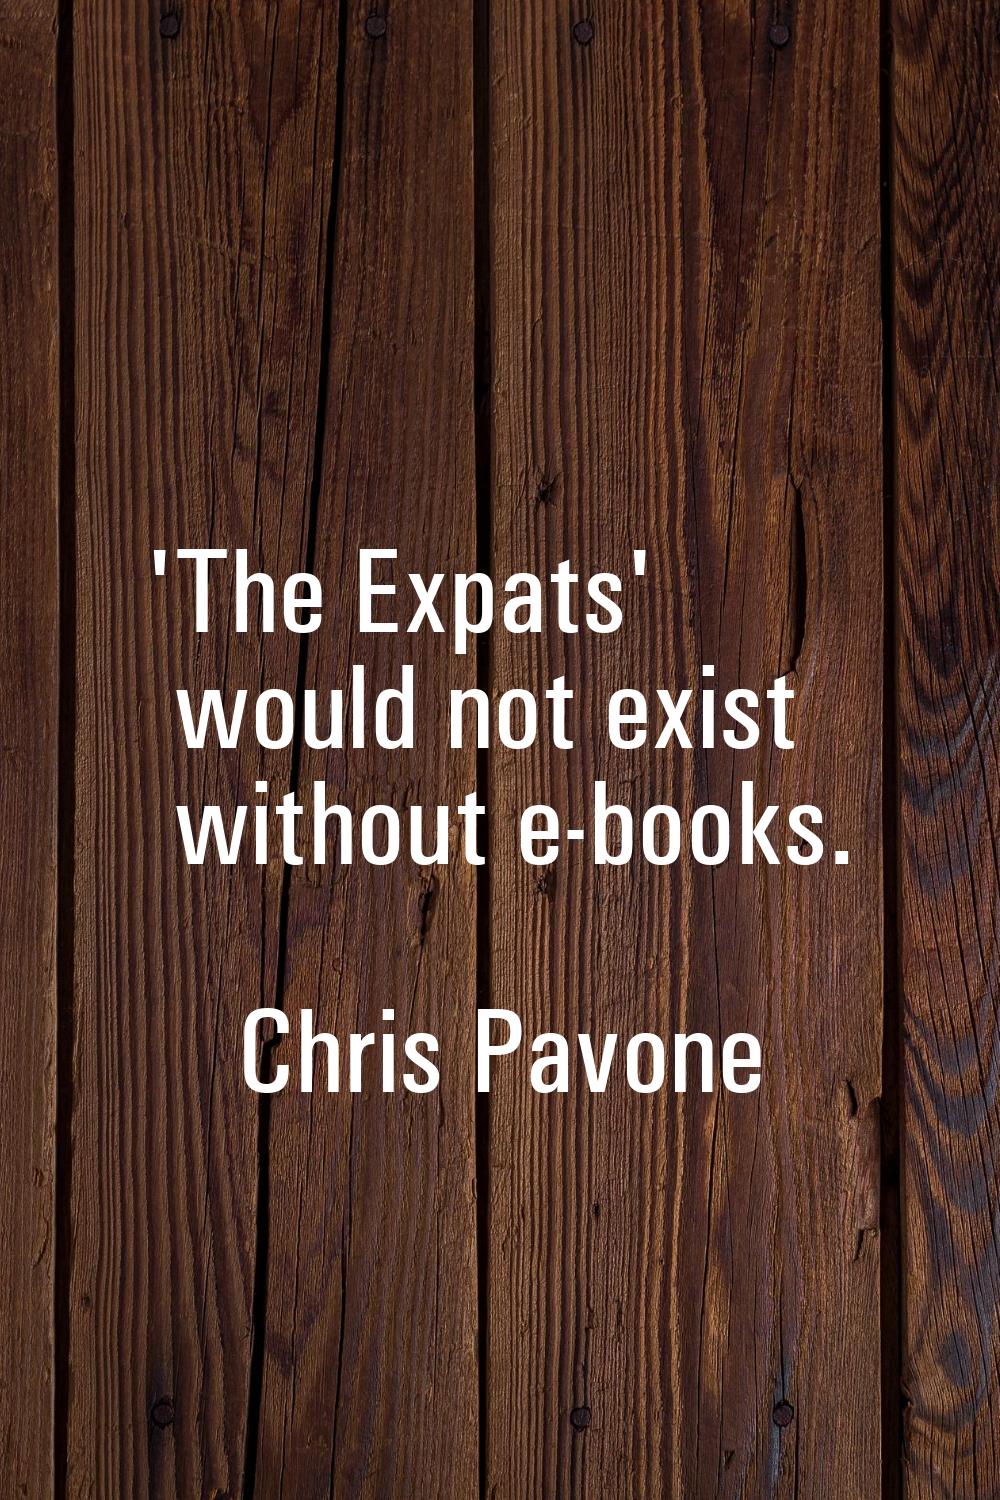 'The Expats' would not exist without e-books.